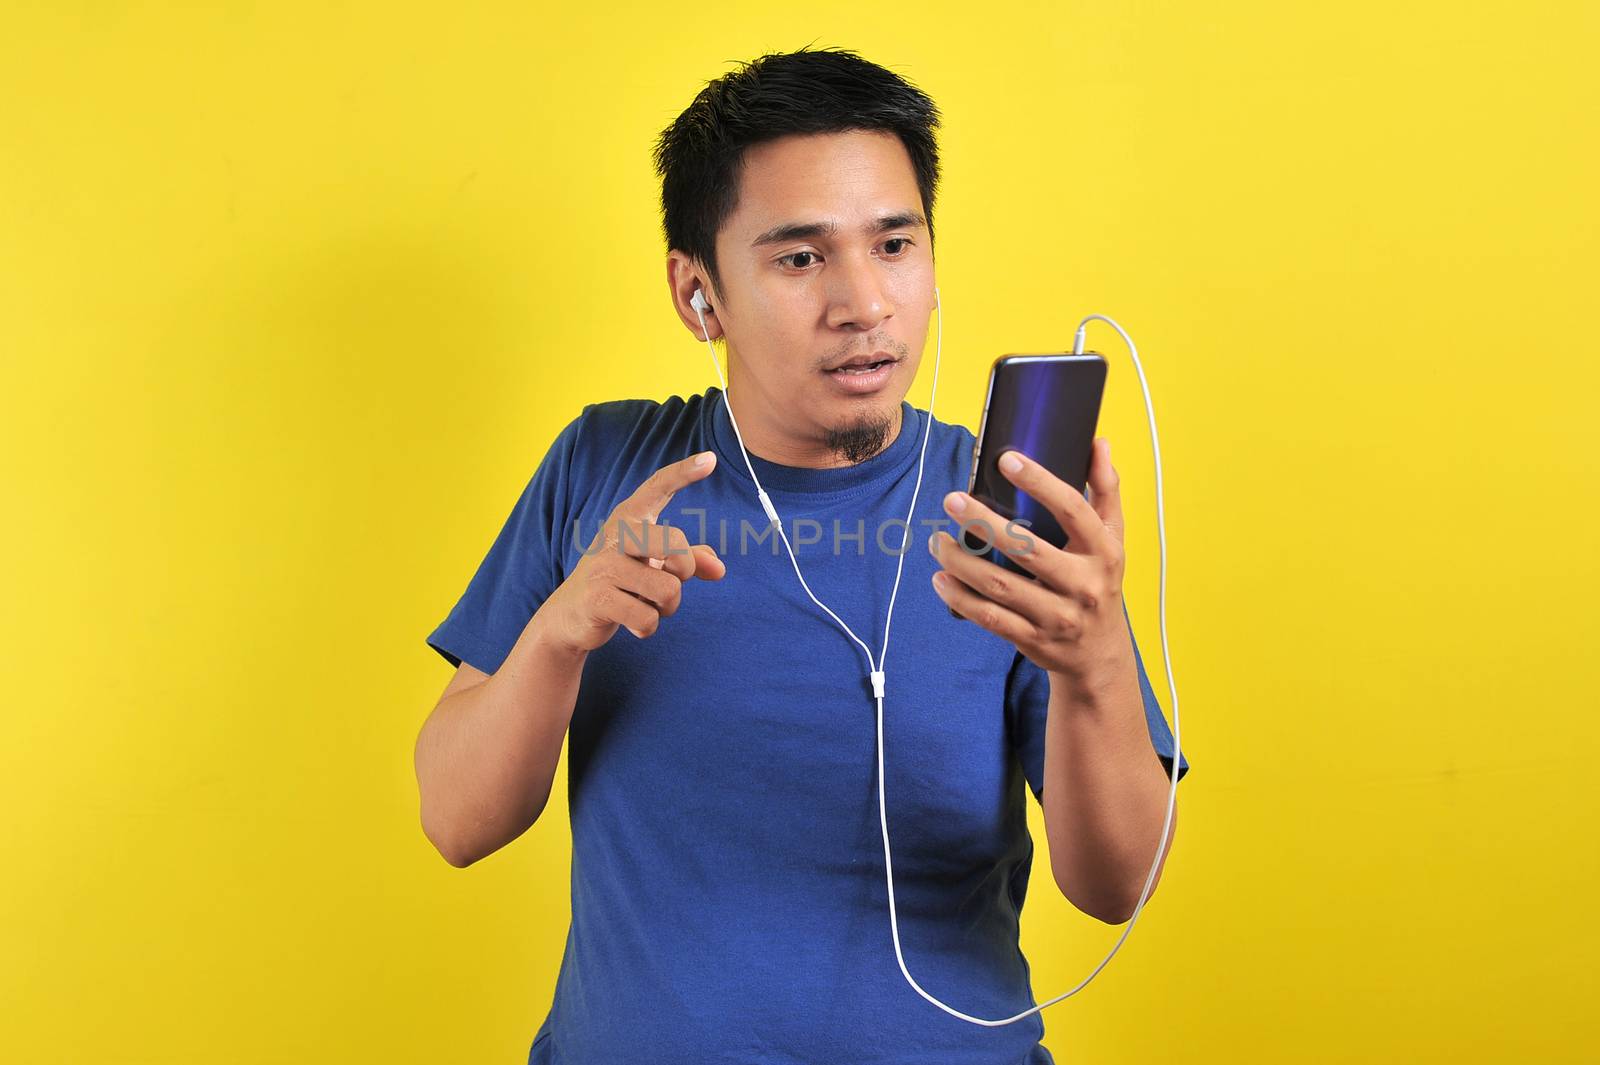 Asian man in casual blue t-shirt wearing headset listening to music from smartphone, shock expression, on yellow background